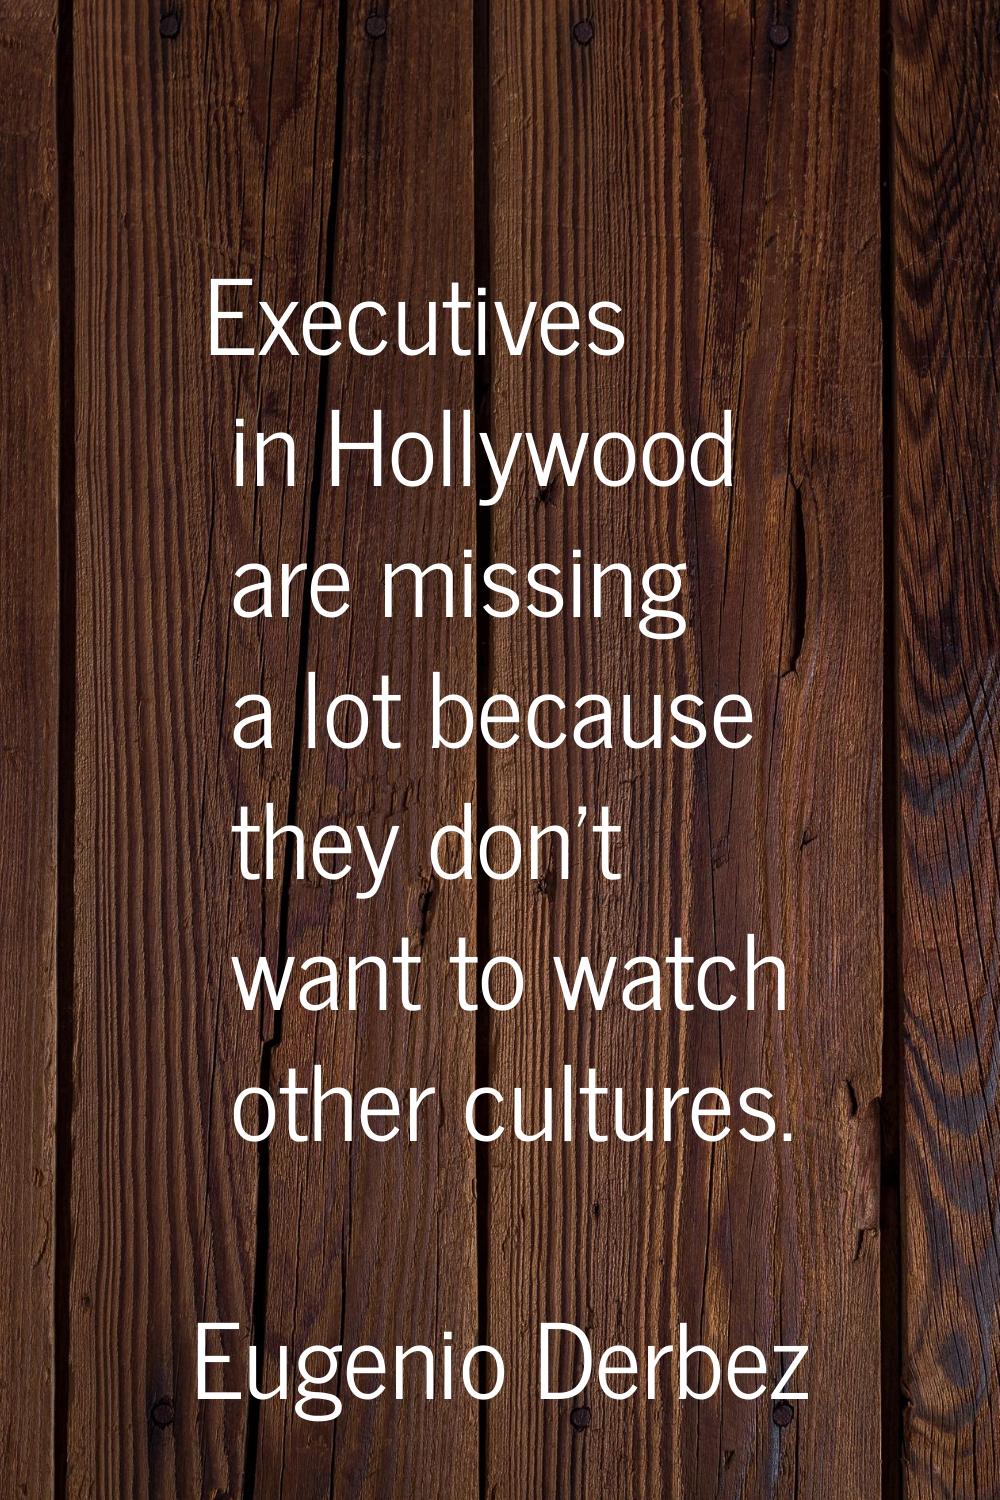 Executives in Hollywood are missing a lot because they don't want to watch other cultures.